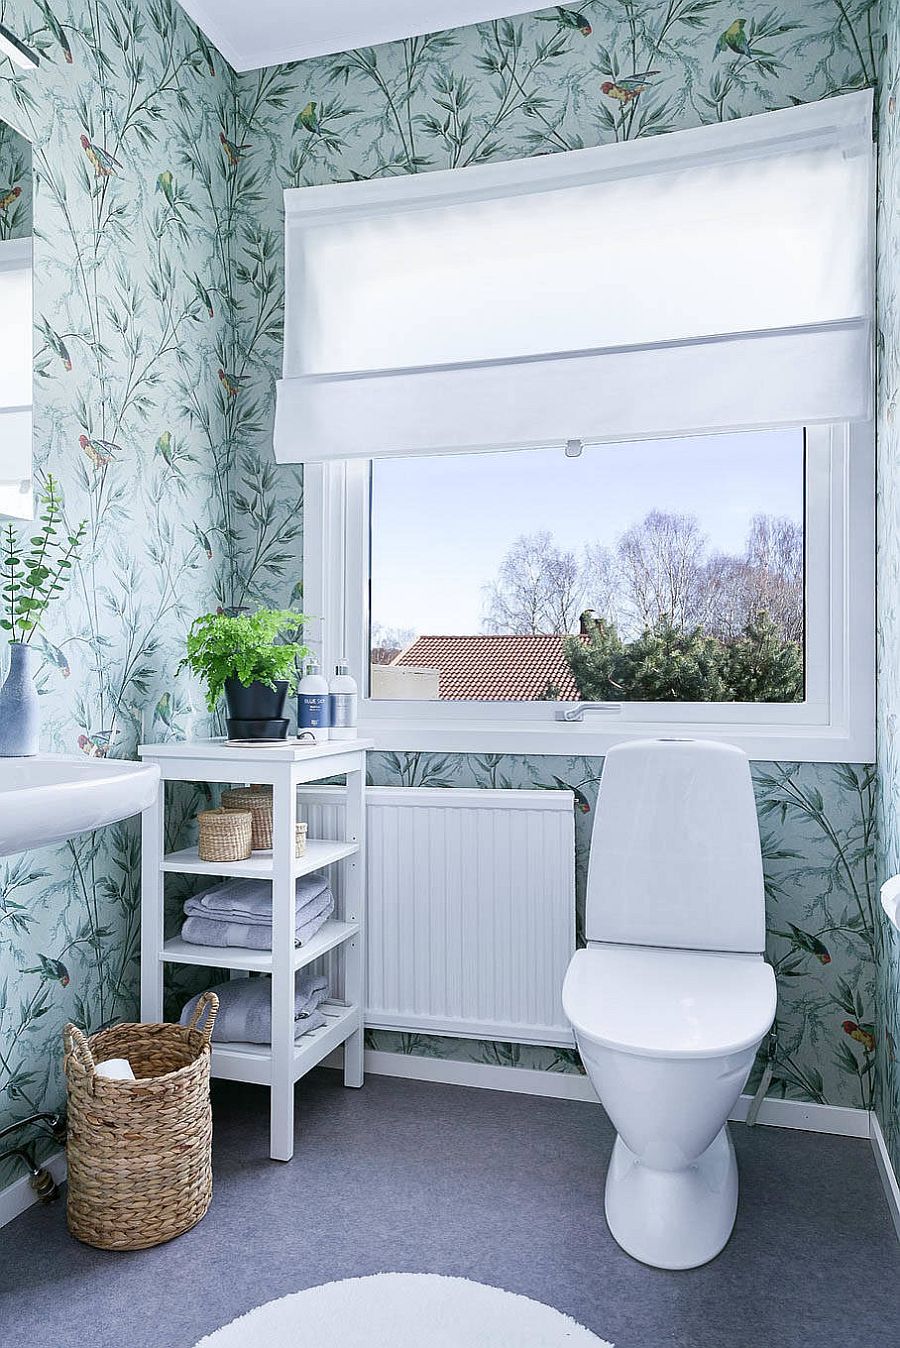 Modern Scandinavian style powder room with floral pattern wallpaper and light blue backdrop